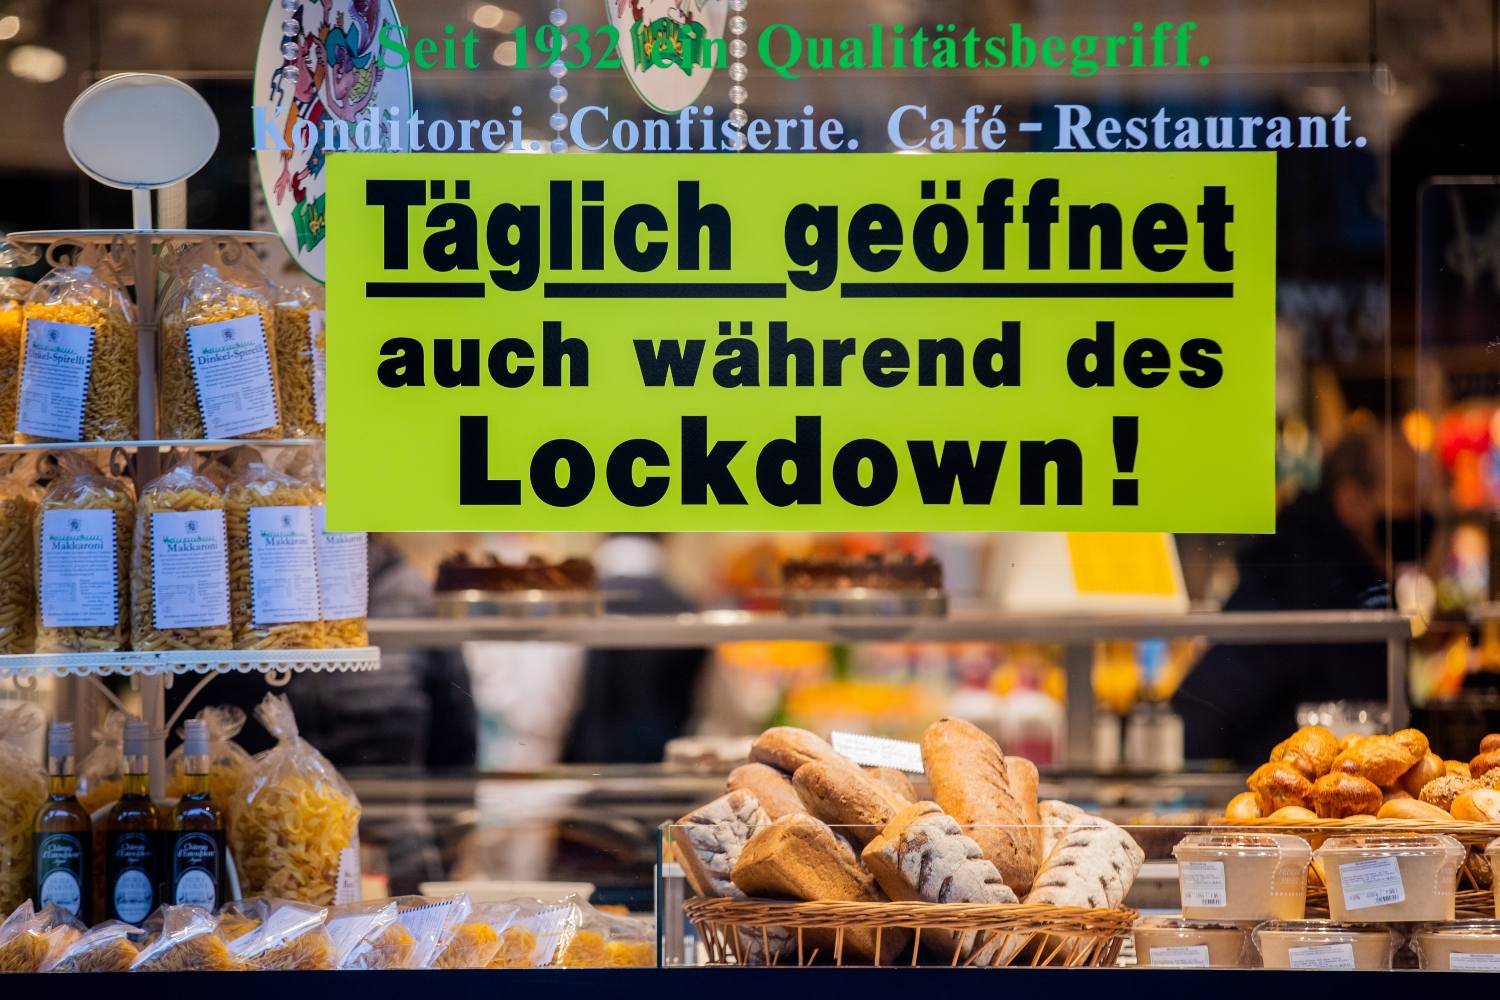 ‘Lockdown’ voted Germany’s English word of the year